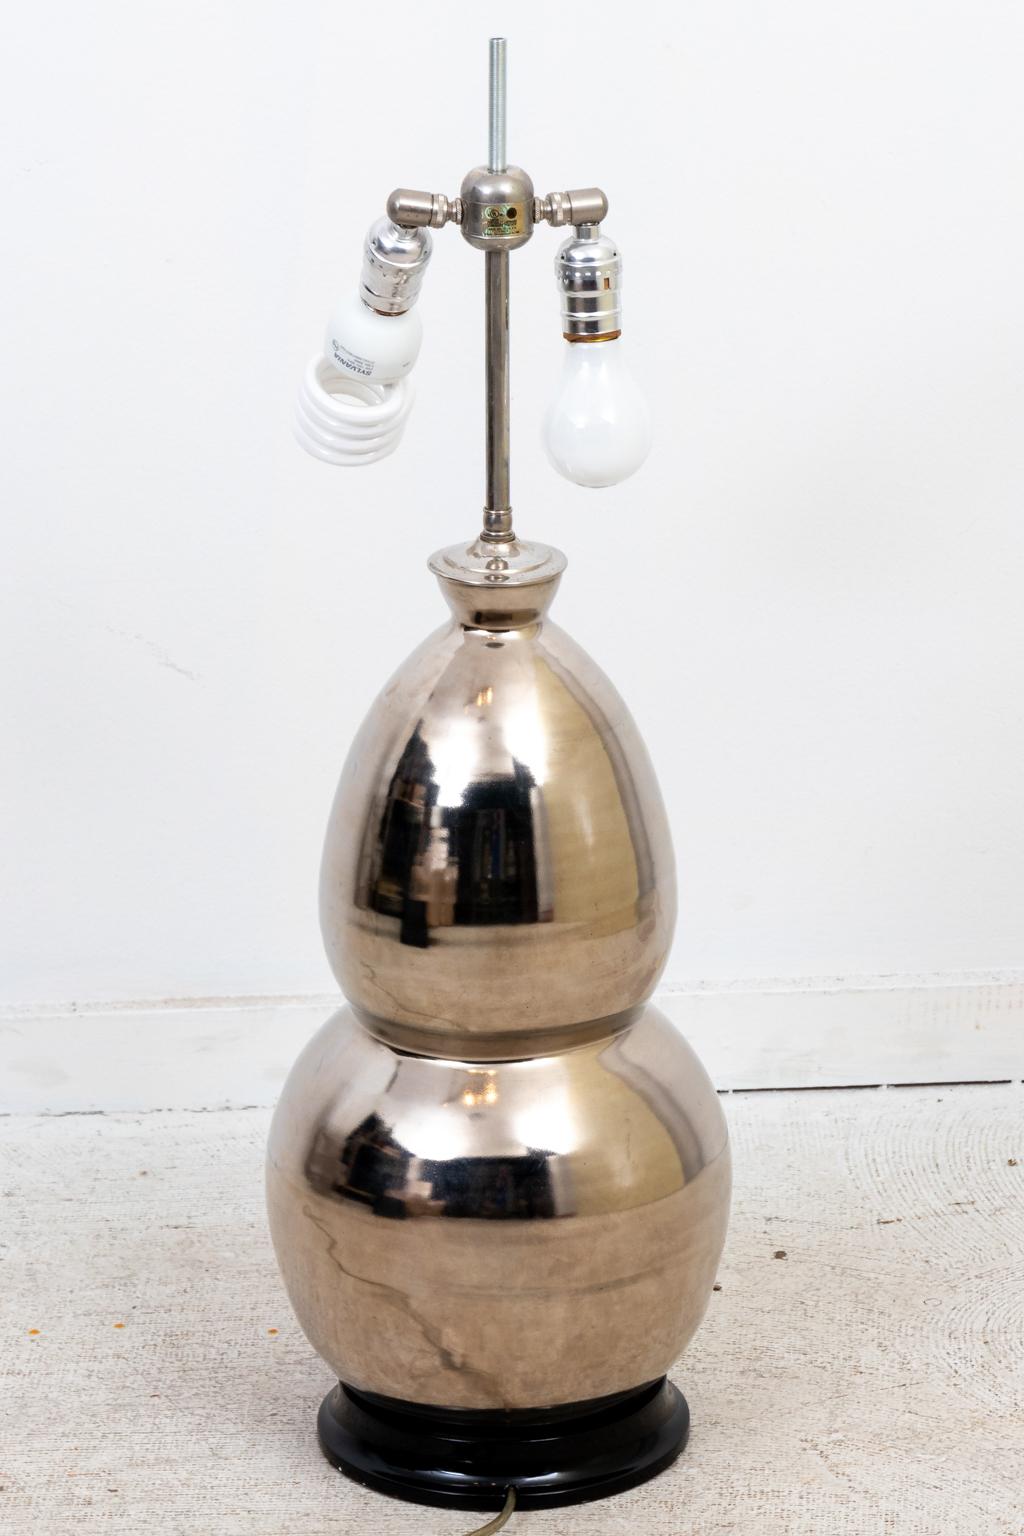 Silver gourd form table lamp made by Christopher Spitzmiller in the early 2000s. The piece features a black wood painted base. Made in the United States. Shade not included. Please note of wear consistent with age including minor scratch to the